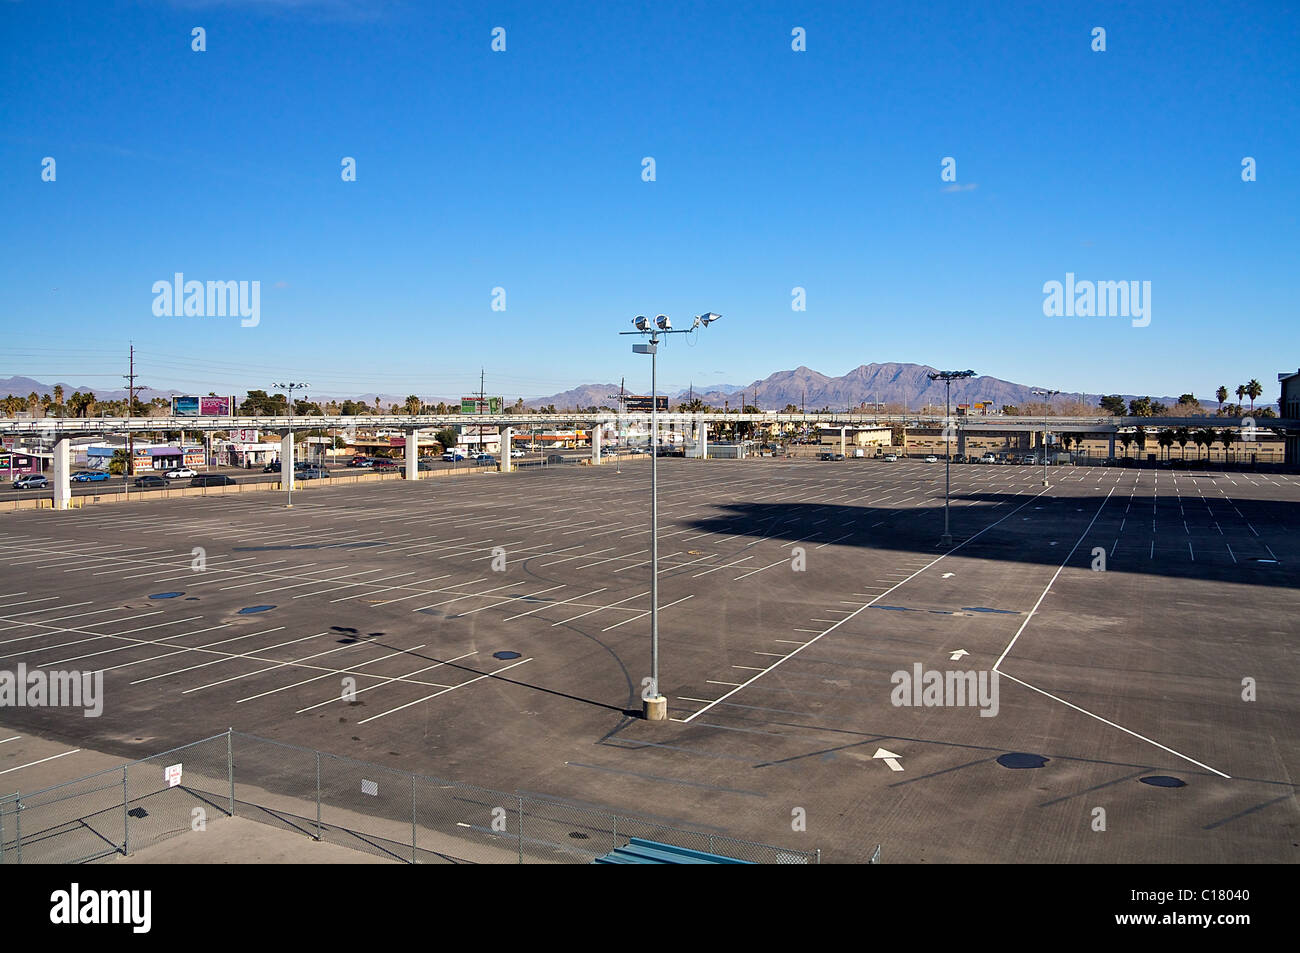 A parking lot and monorail tracks in Las Vegas, Nevada Stock Photo